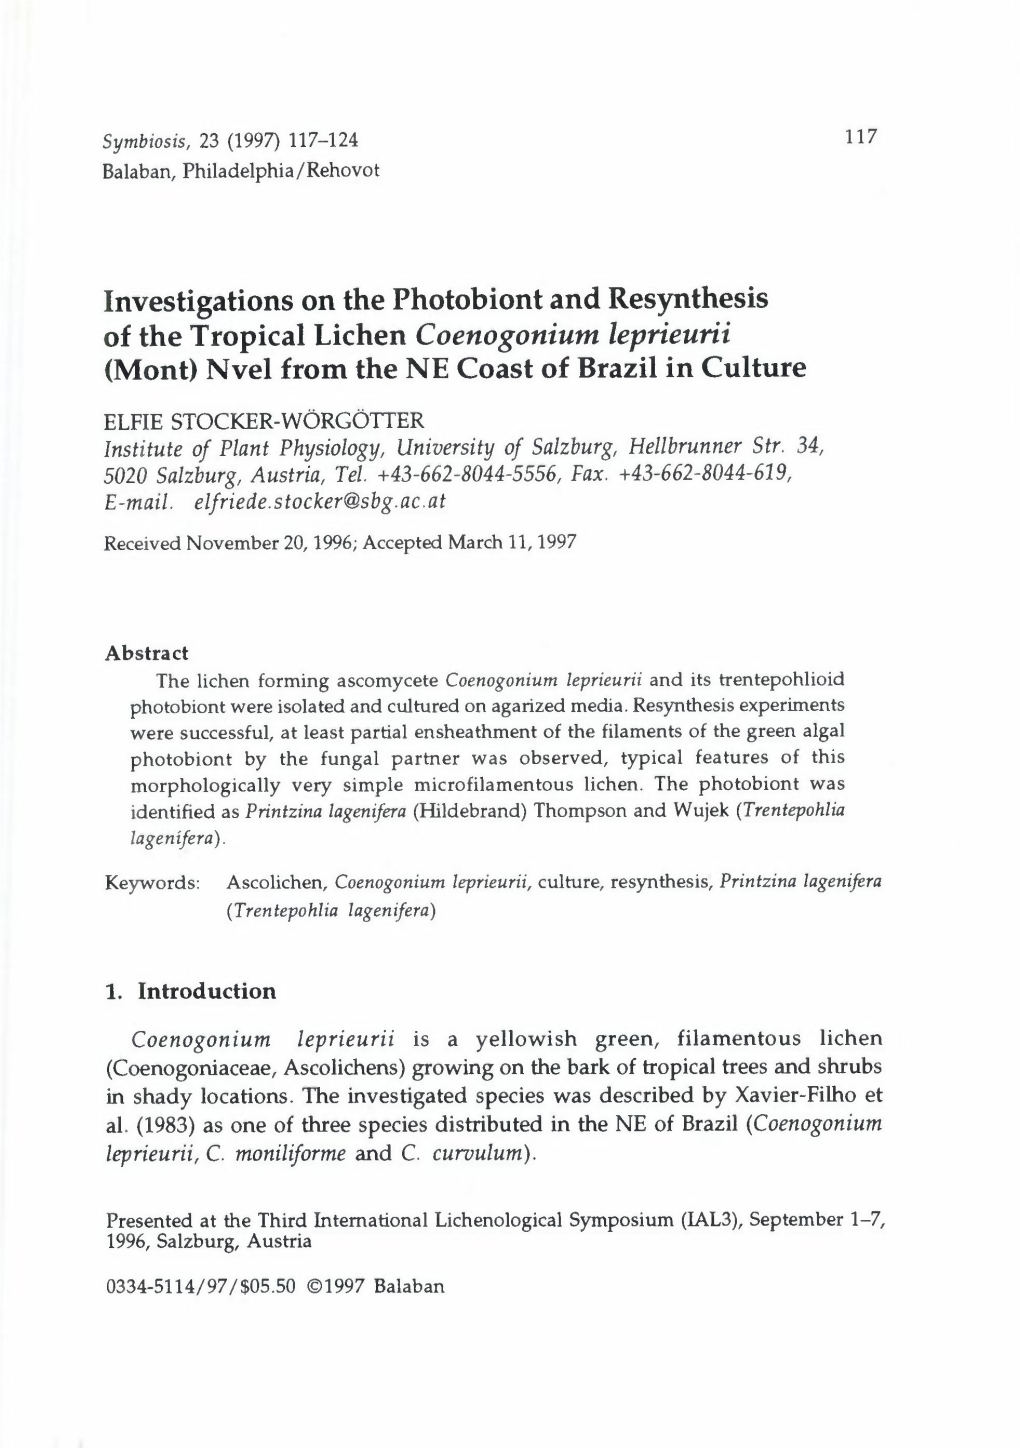 Investigations on the Photobiont and Resynthesis of the Tropical Lichen Coenogonium Leprieurii (Mont) Nvel from the NE Coast of Brazil in Culture